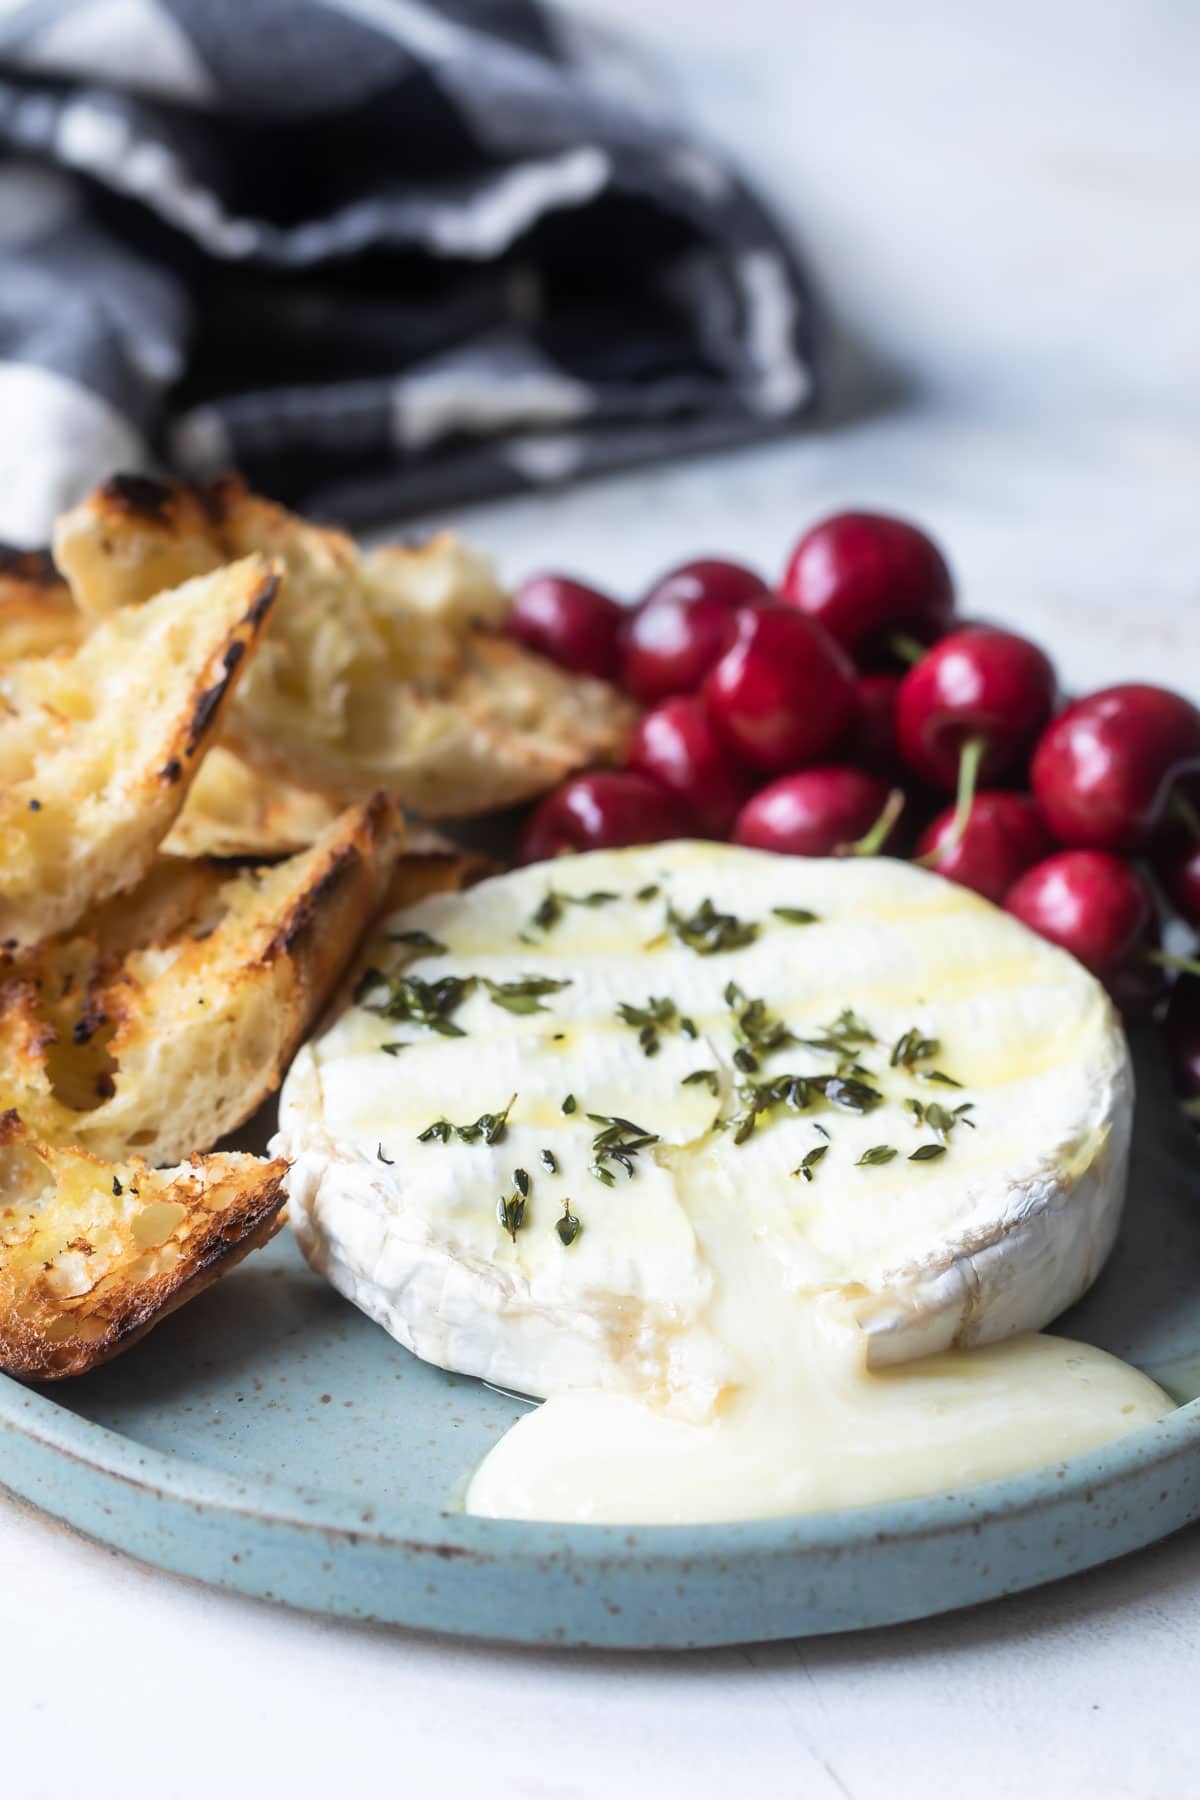 Baked brie on a blue plate with cherries and toasted bread pieces.